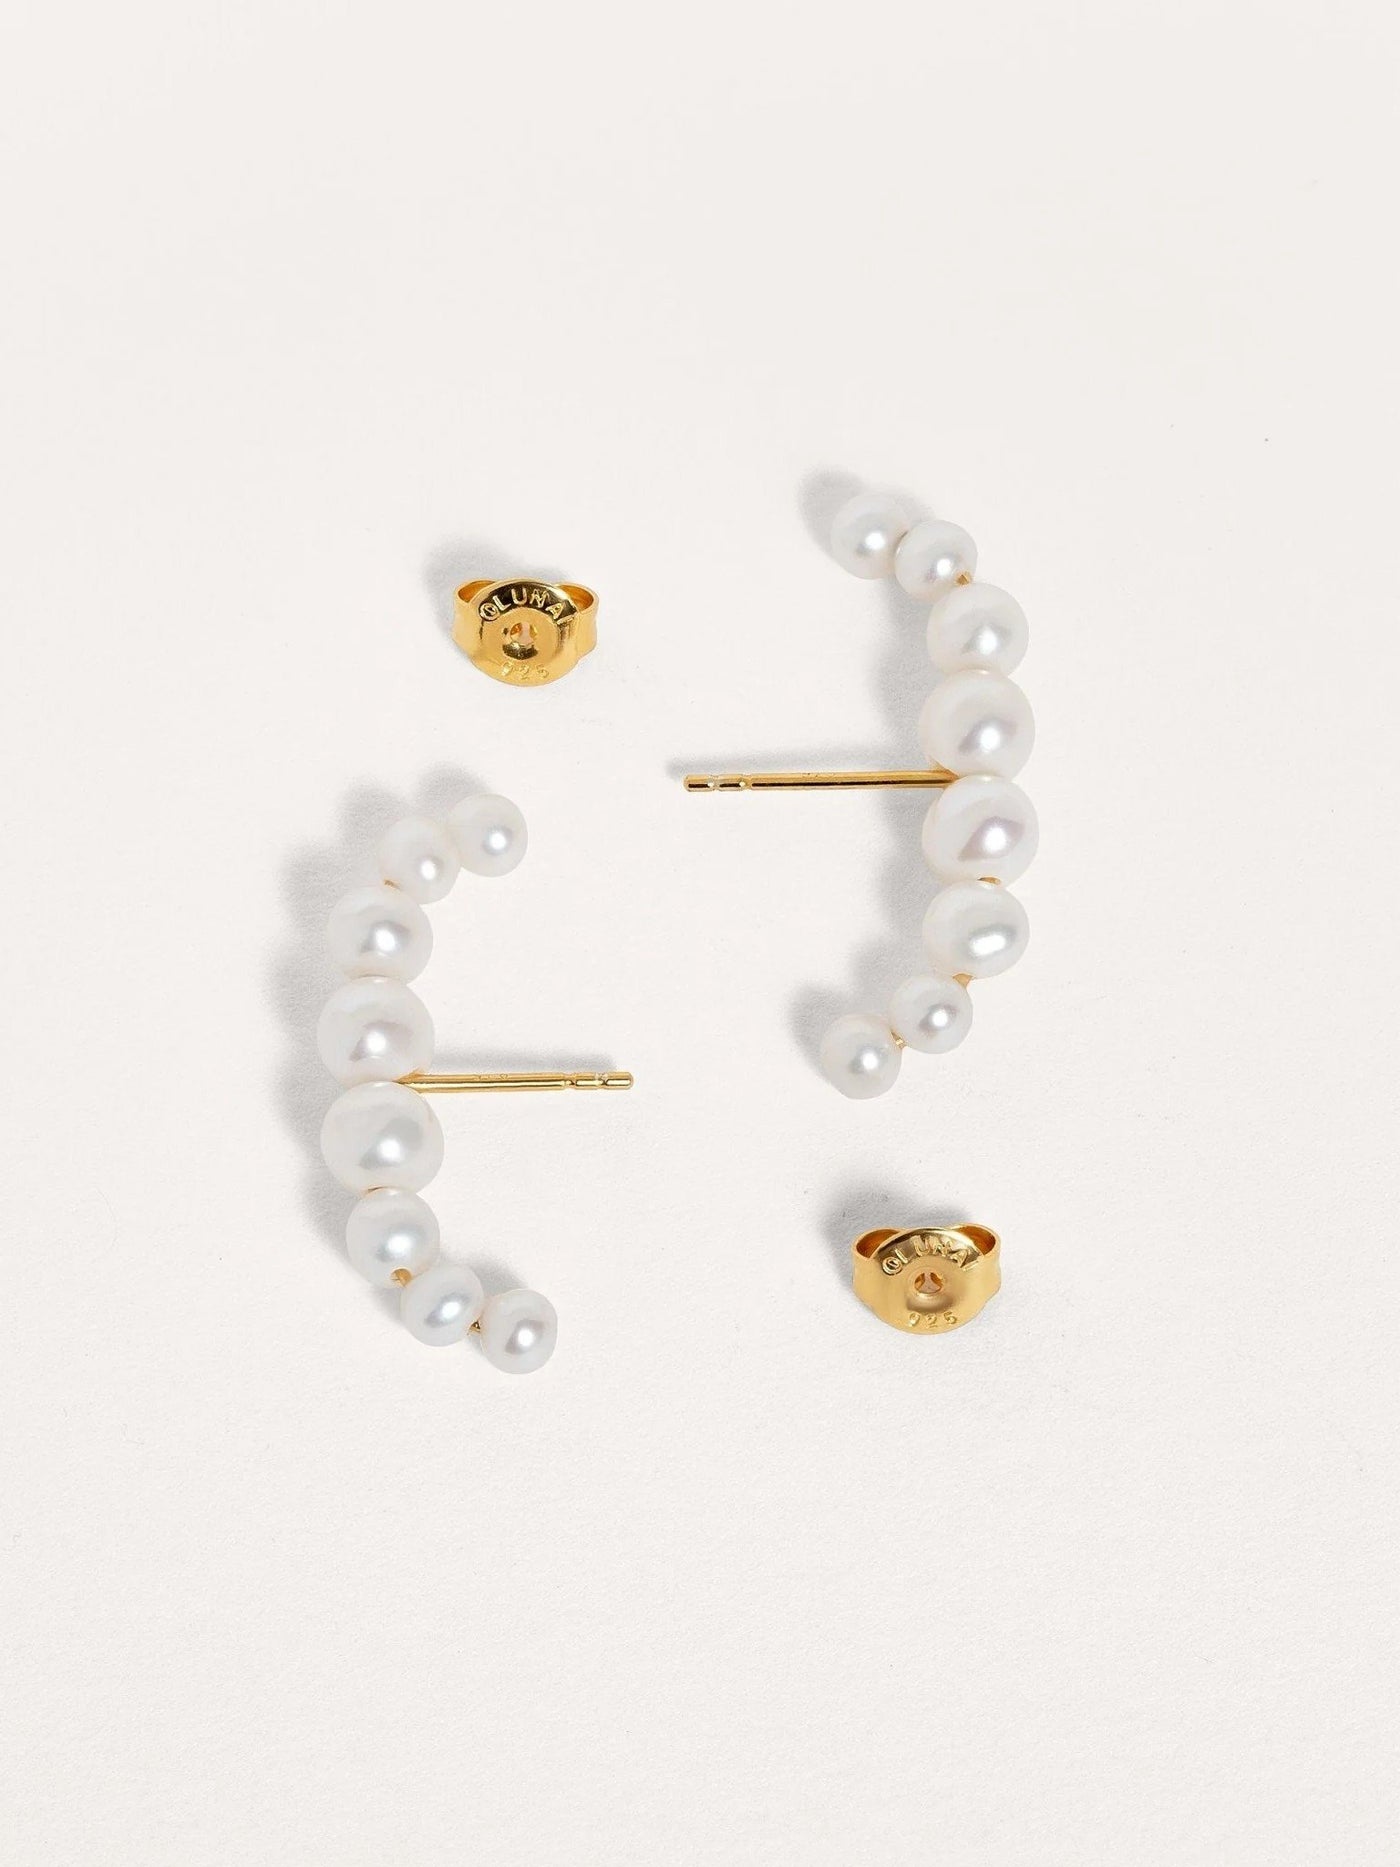 Statement Pearl Ear Cuffs - Handcrafted Solid Sterling Silver Earrings with Gold Plated Accents- STD138 - Cuff & Wrap Earringsdainty ear cuffLunai Jewelry